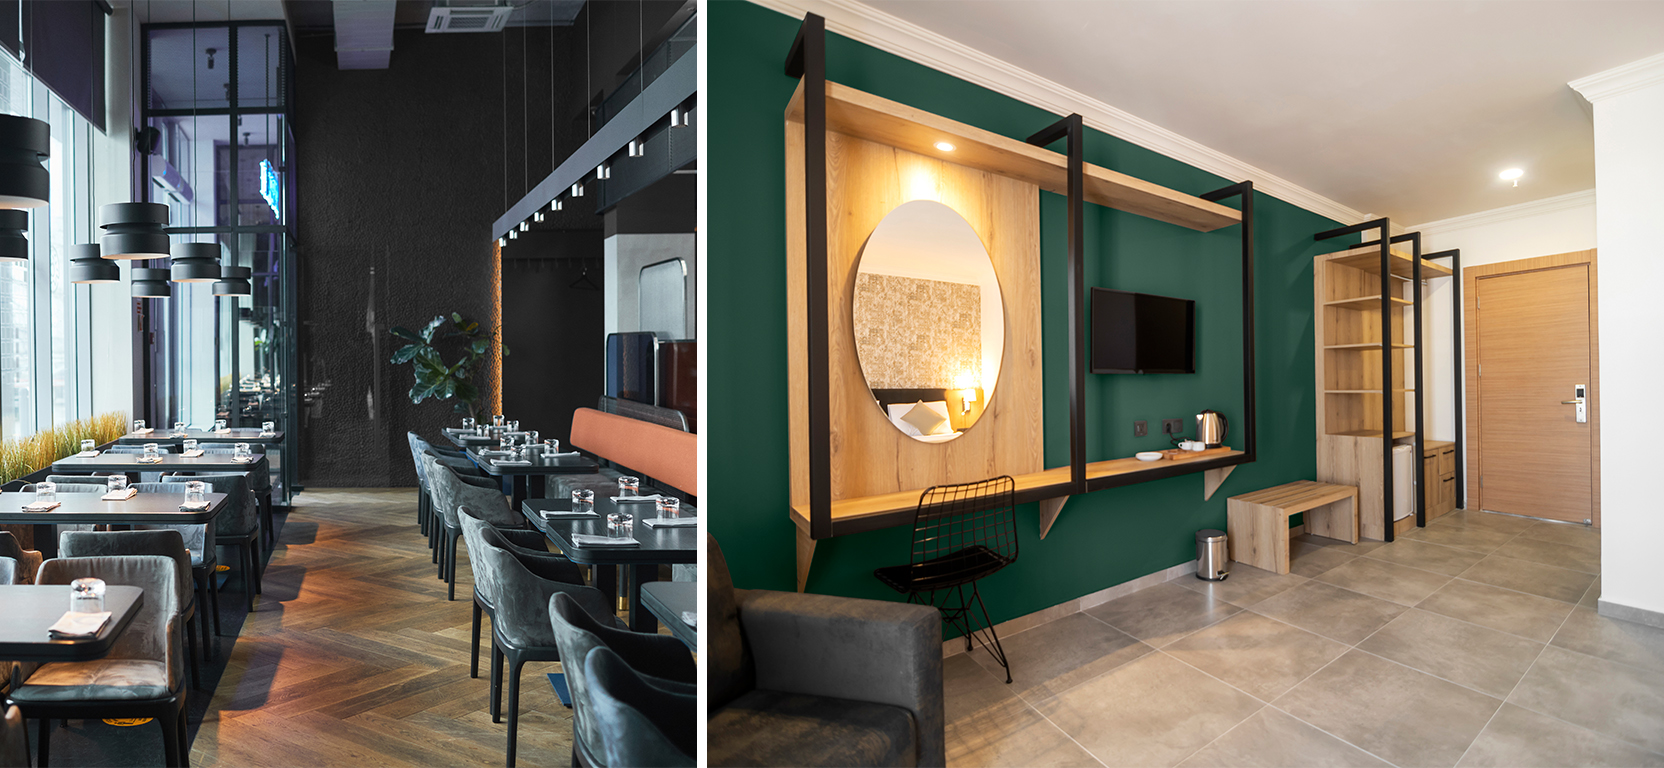 First image: Restaurant interior with herringbone wood floor, black walls and tables and chairs. Second image: Hotel room entryway with built-in wood shelving, bench and desk/vanity area and mounted TV on dark green wall with tile floor.